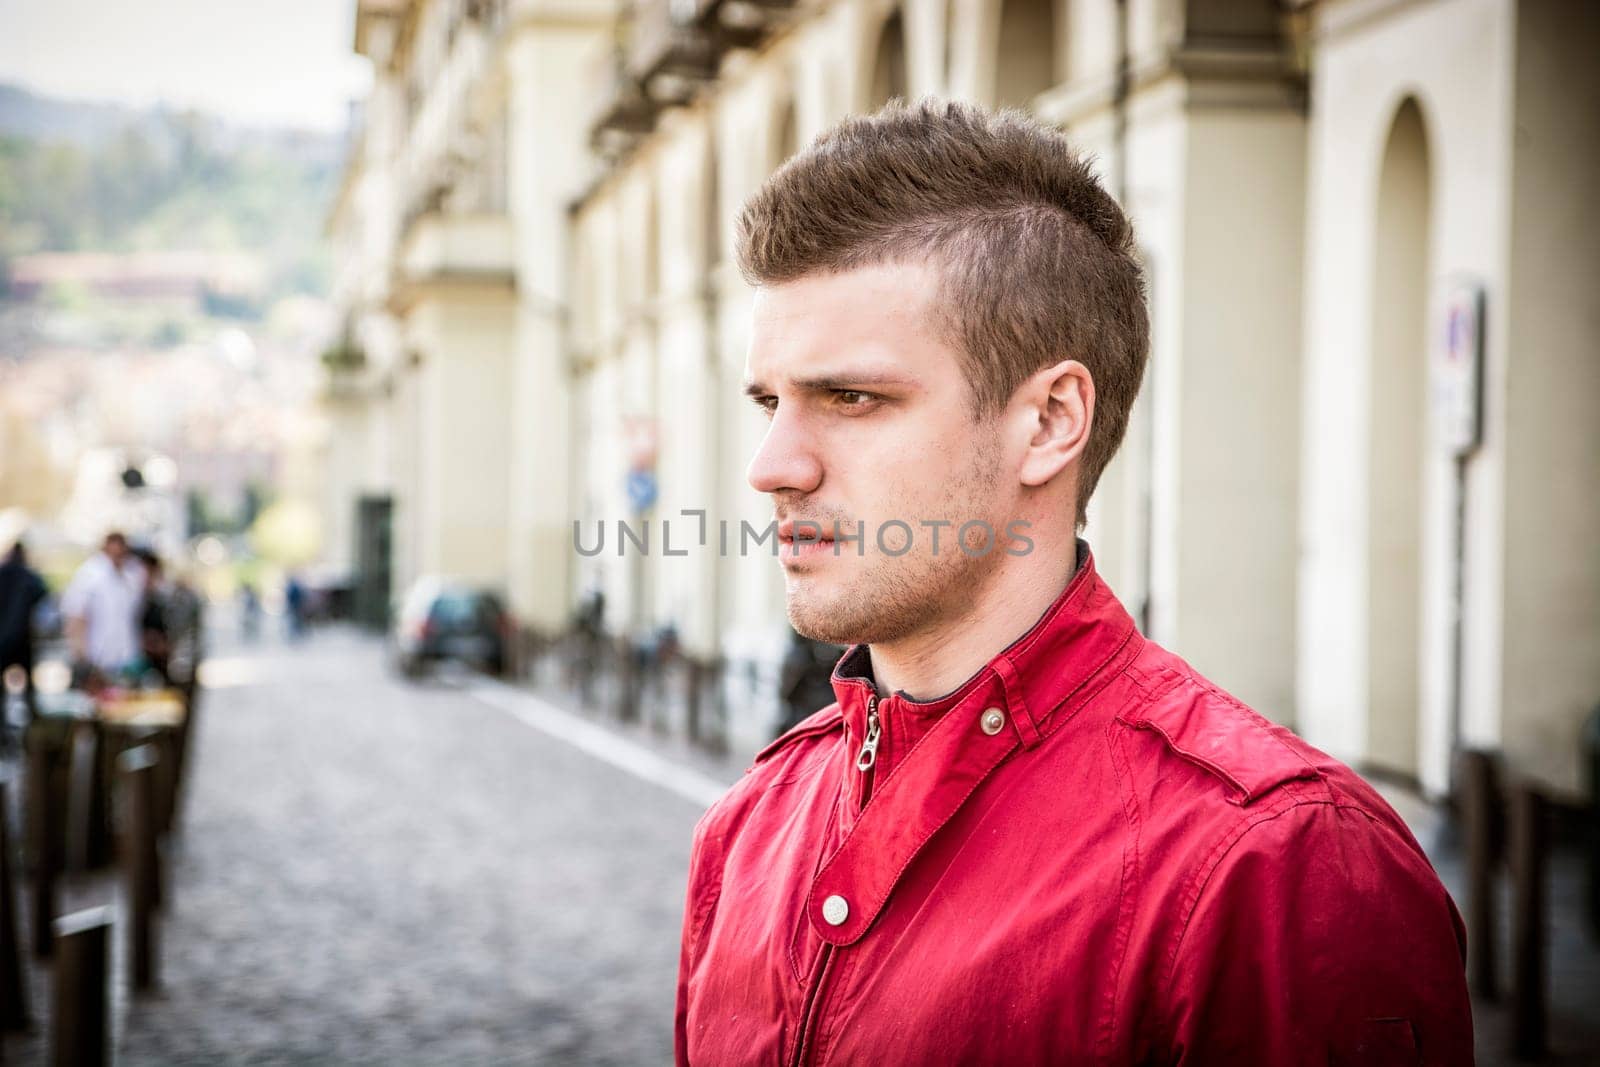 One handsome young man in urban setting in European city